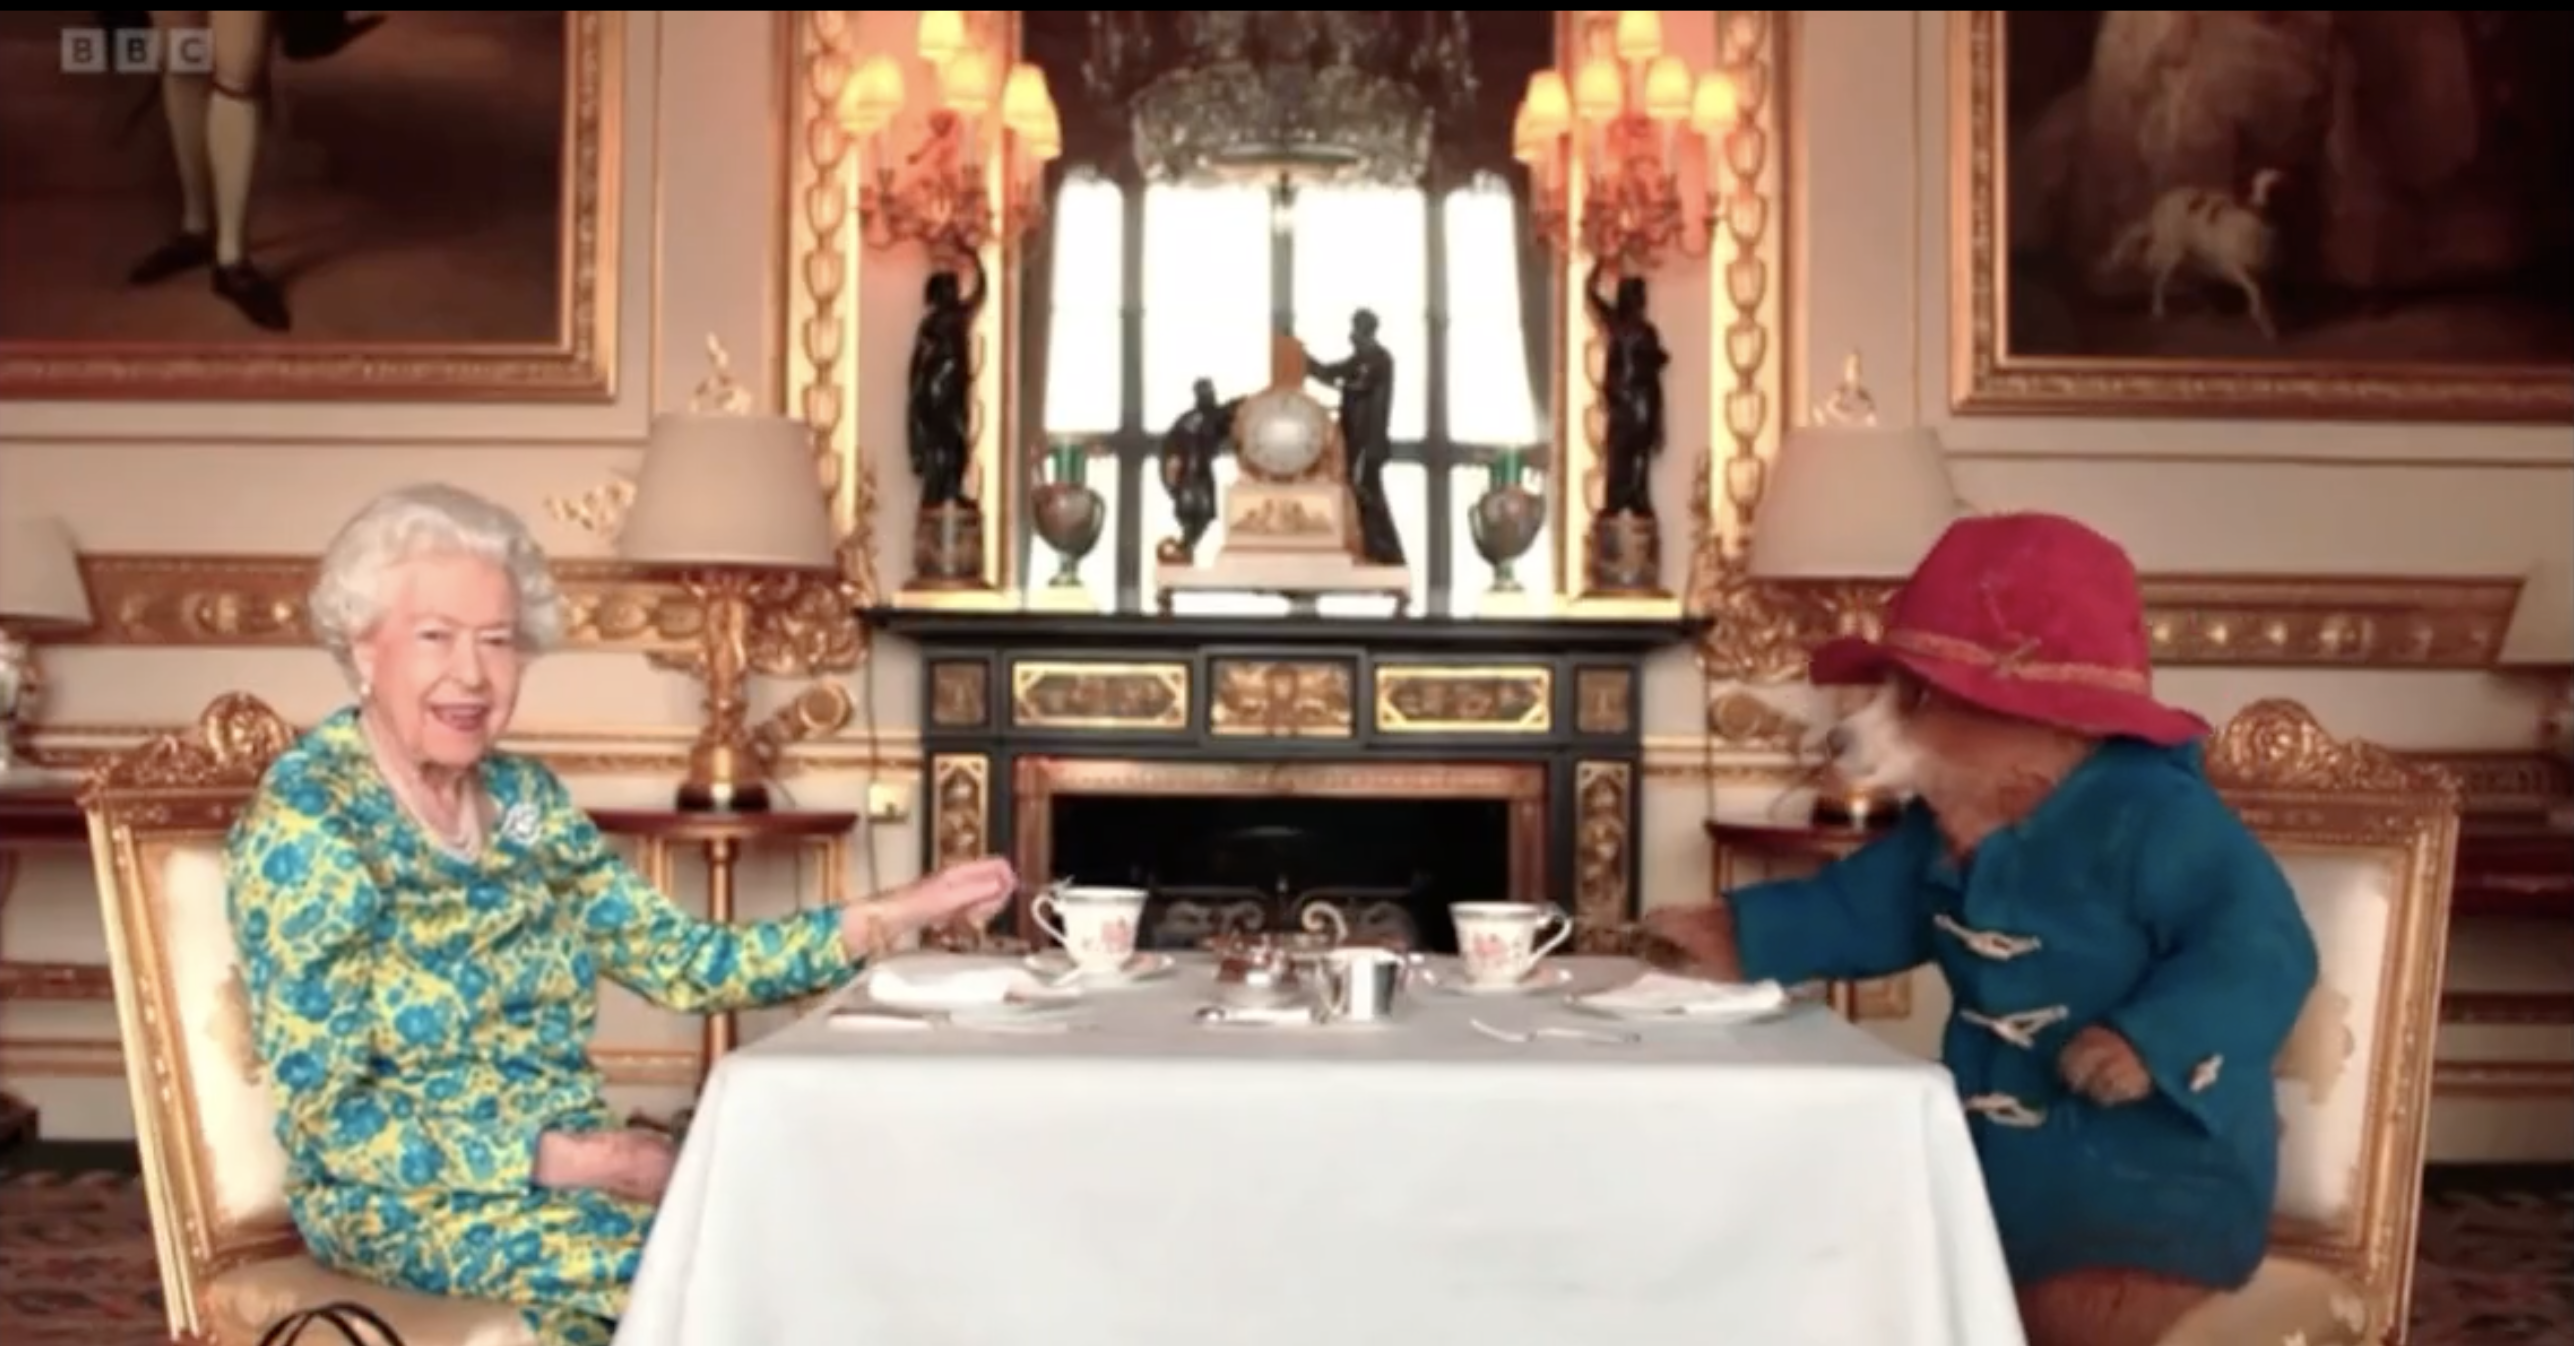 The Queen and Paddington at the table